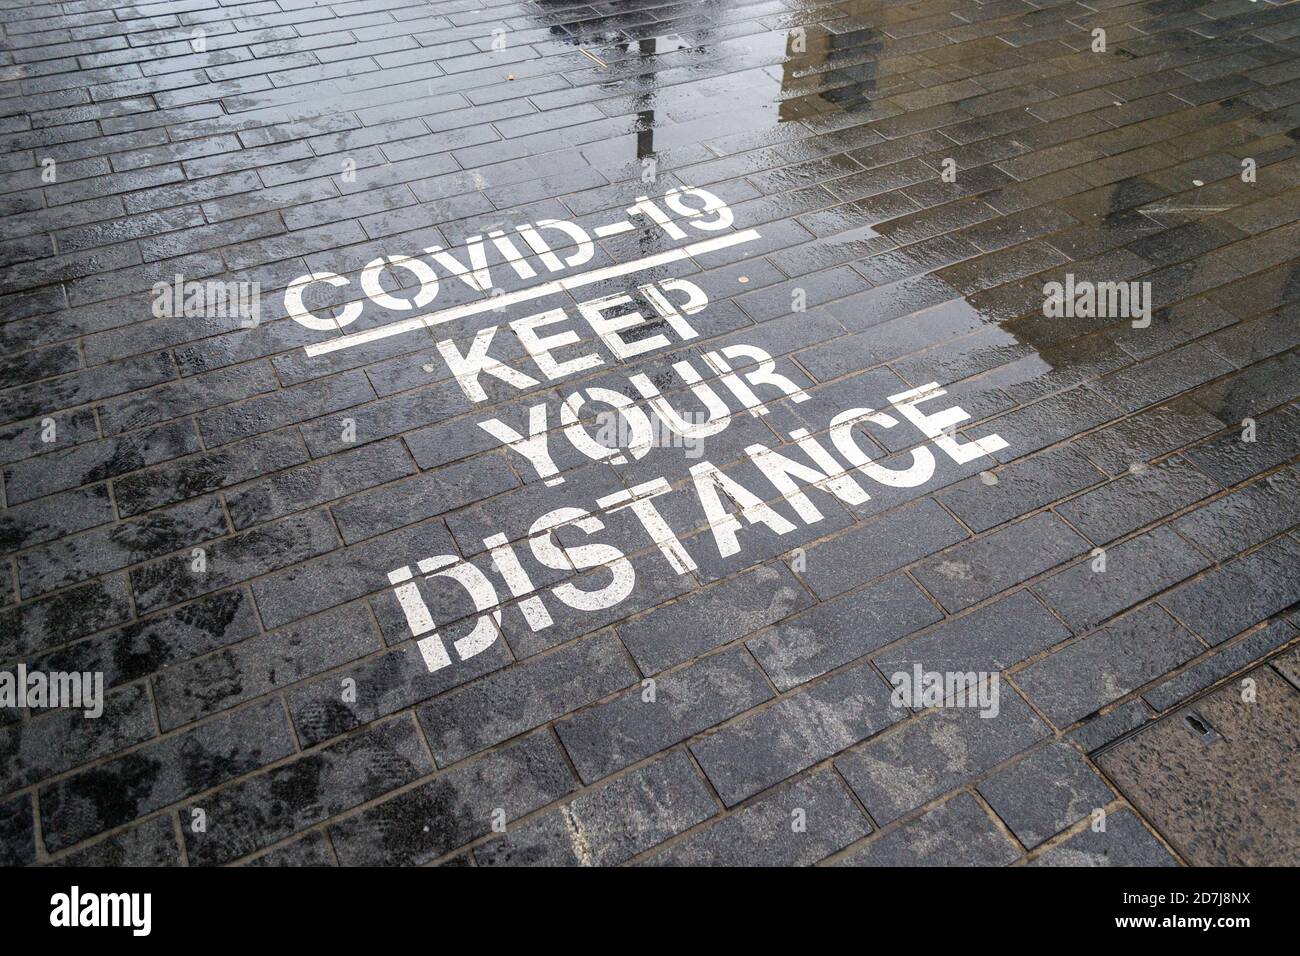 Covid-19 Keep Your Distance stenciled road sign, social distancing, Birmingham, UK Stock Photo